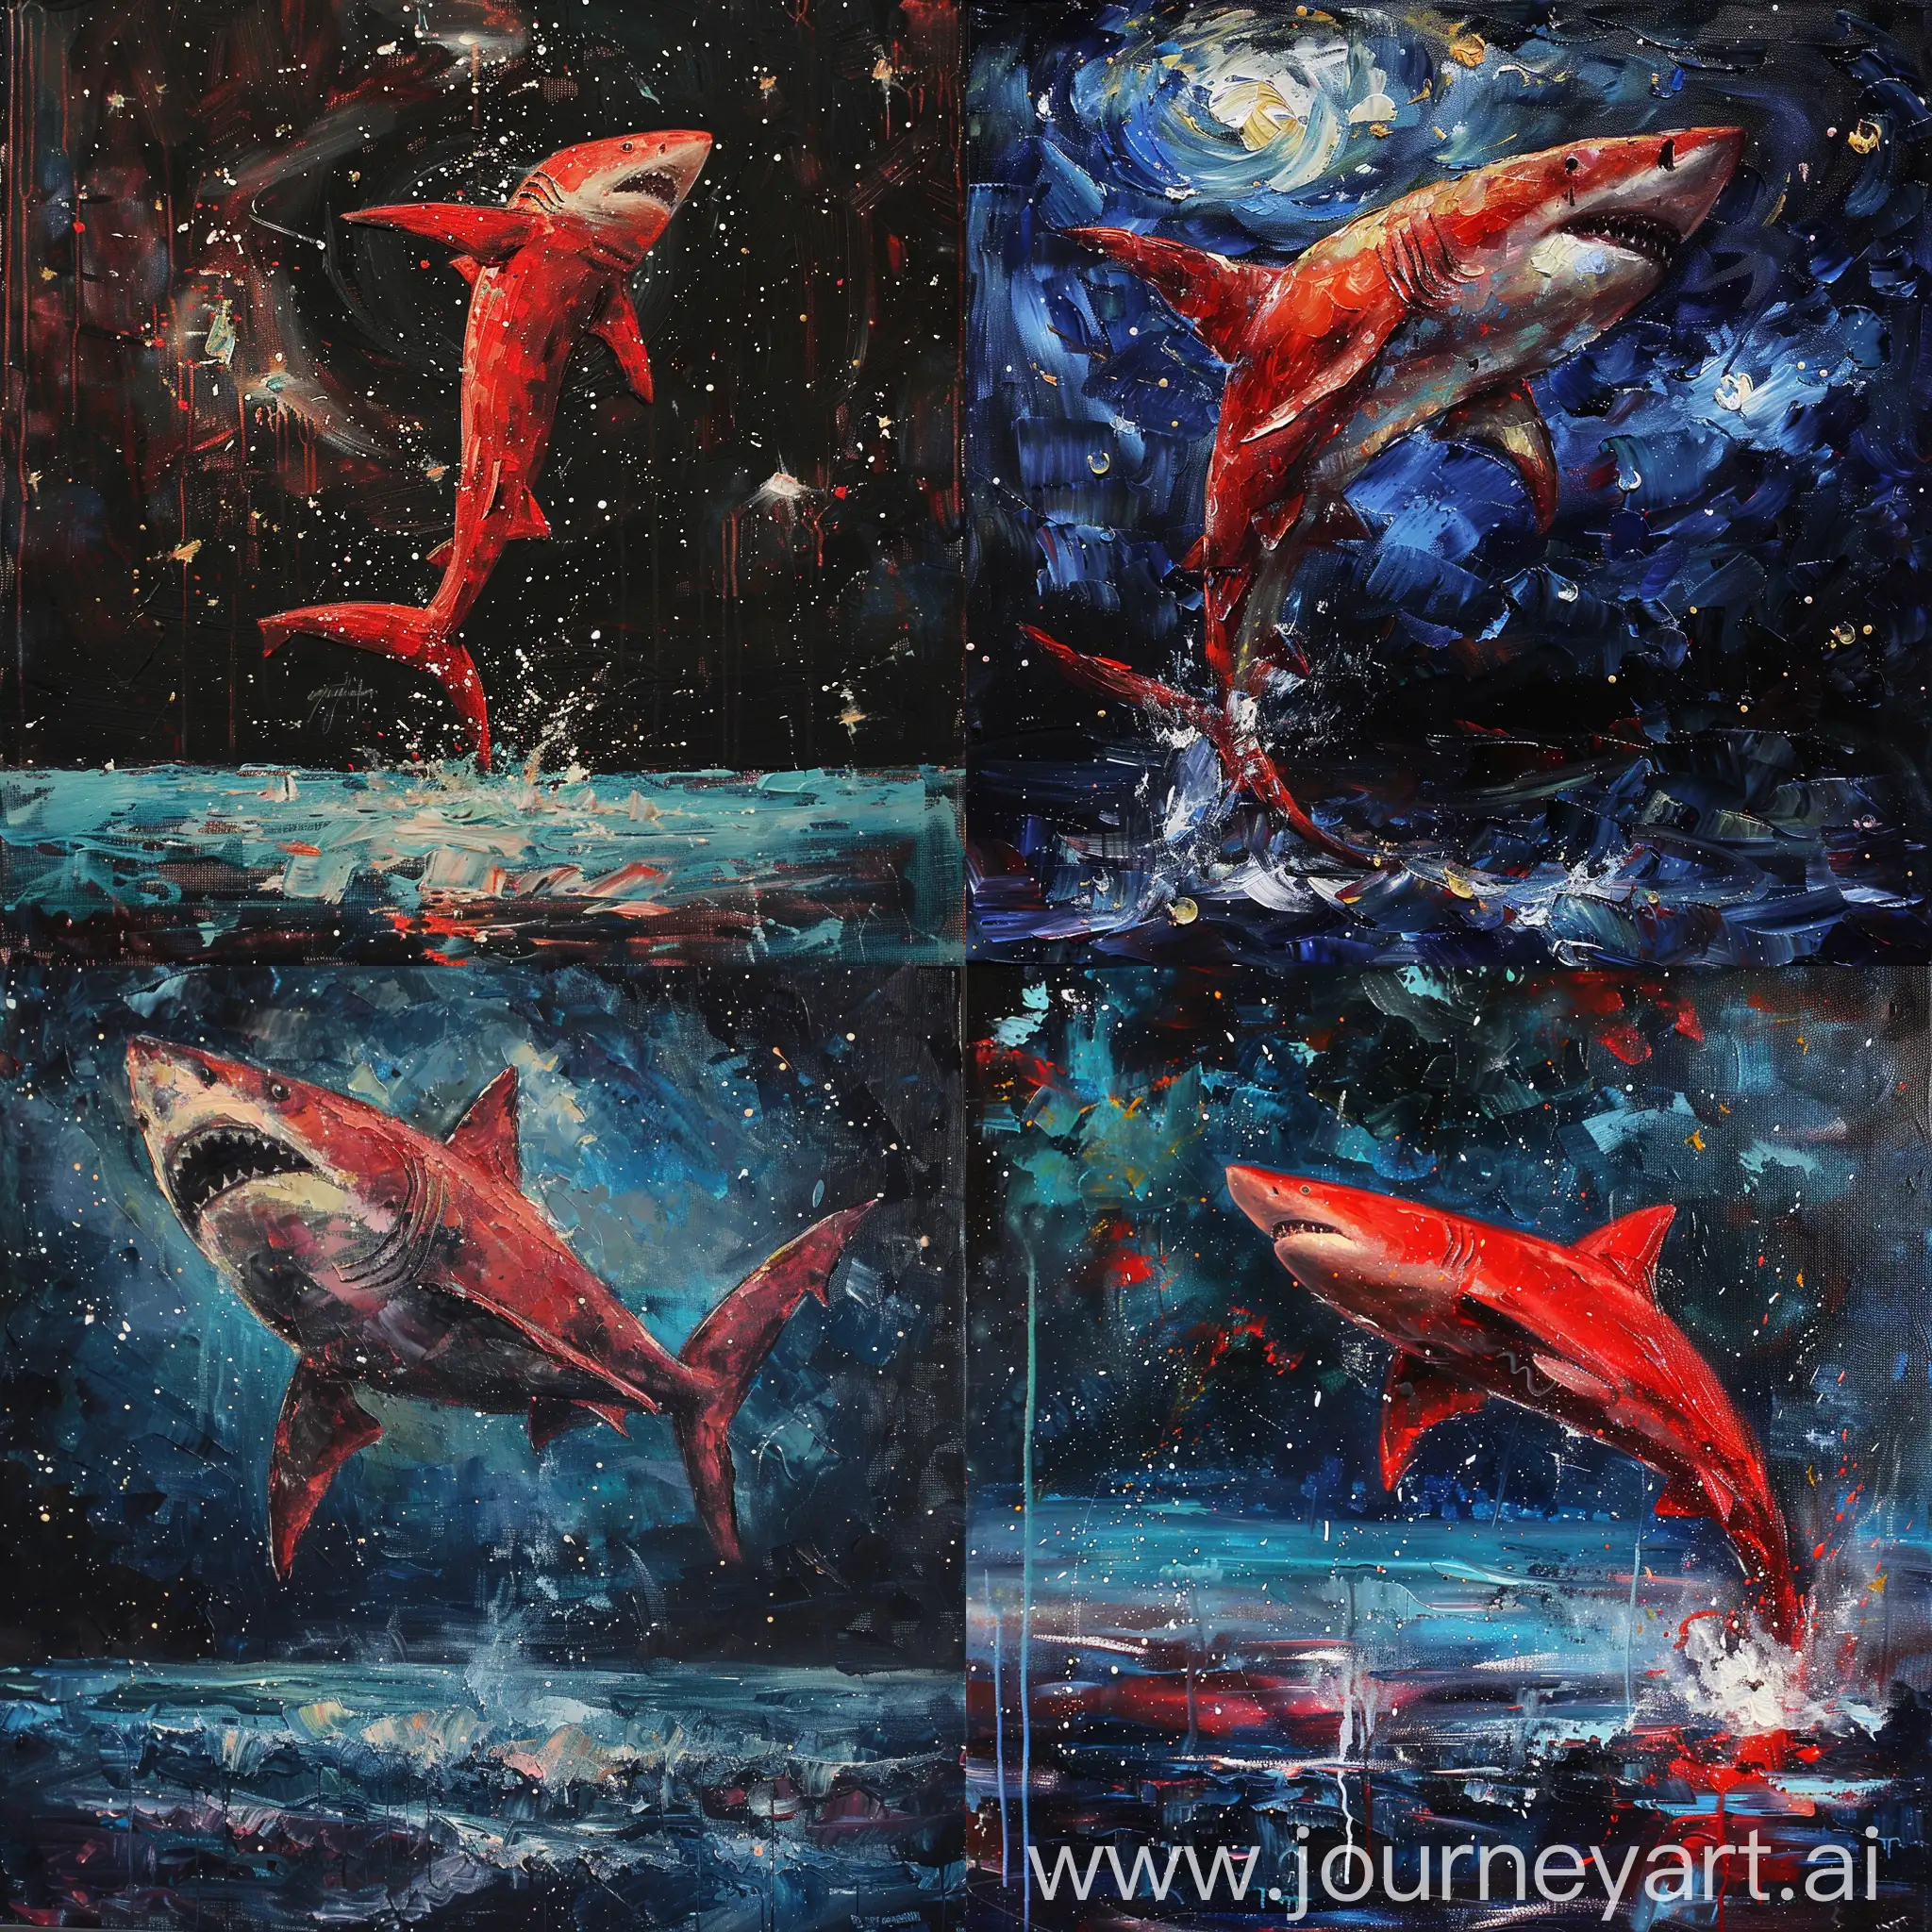 Majestic red shark jumped out of the endless ocean, dreamy dark cosmic night, the ocean expresses sense of depression, shark is escaping from his own home, the ocean of depression, pale dead colors, oil painting